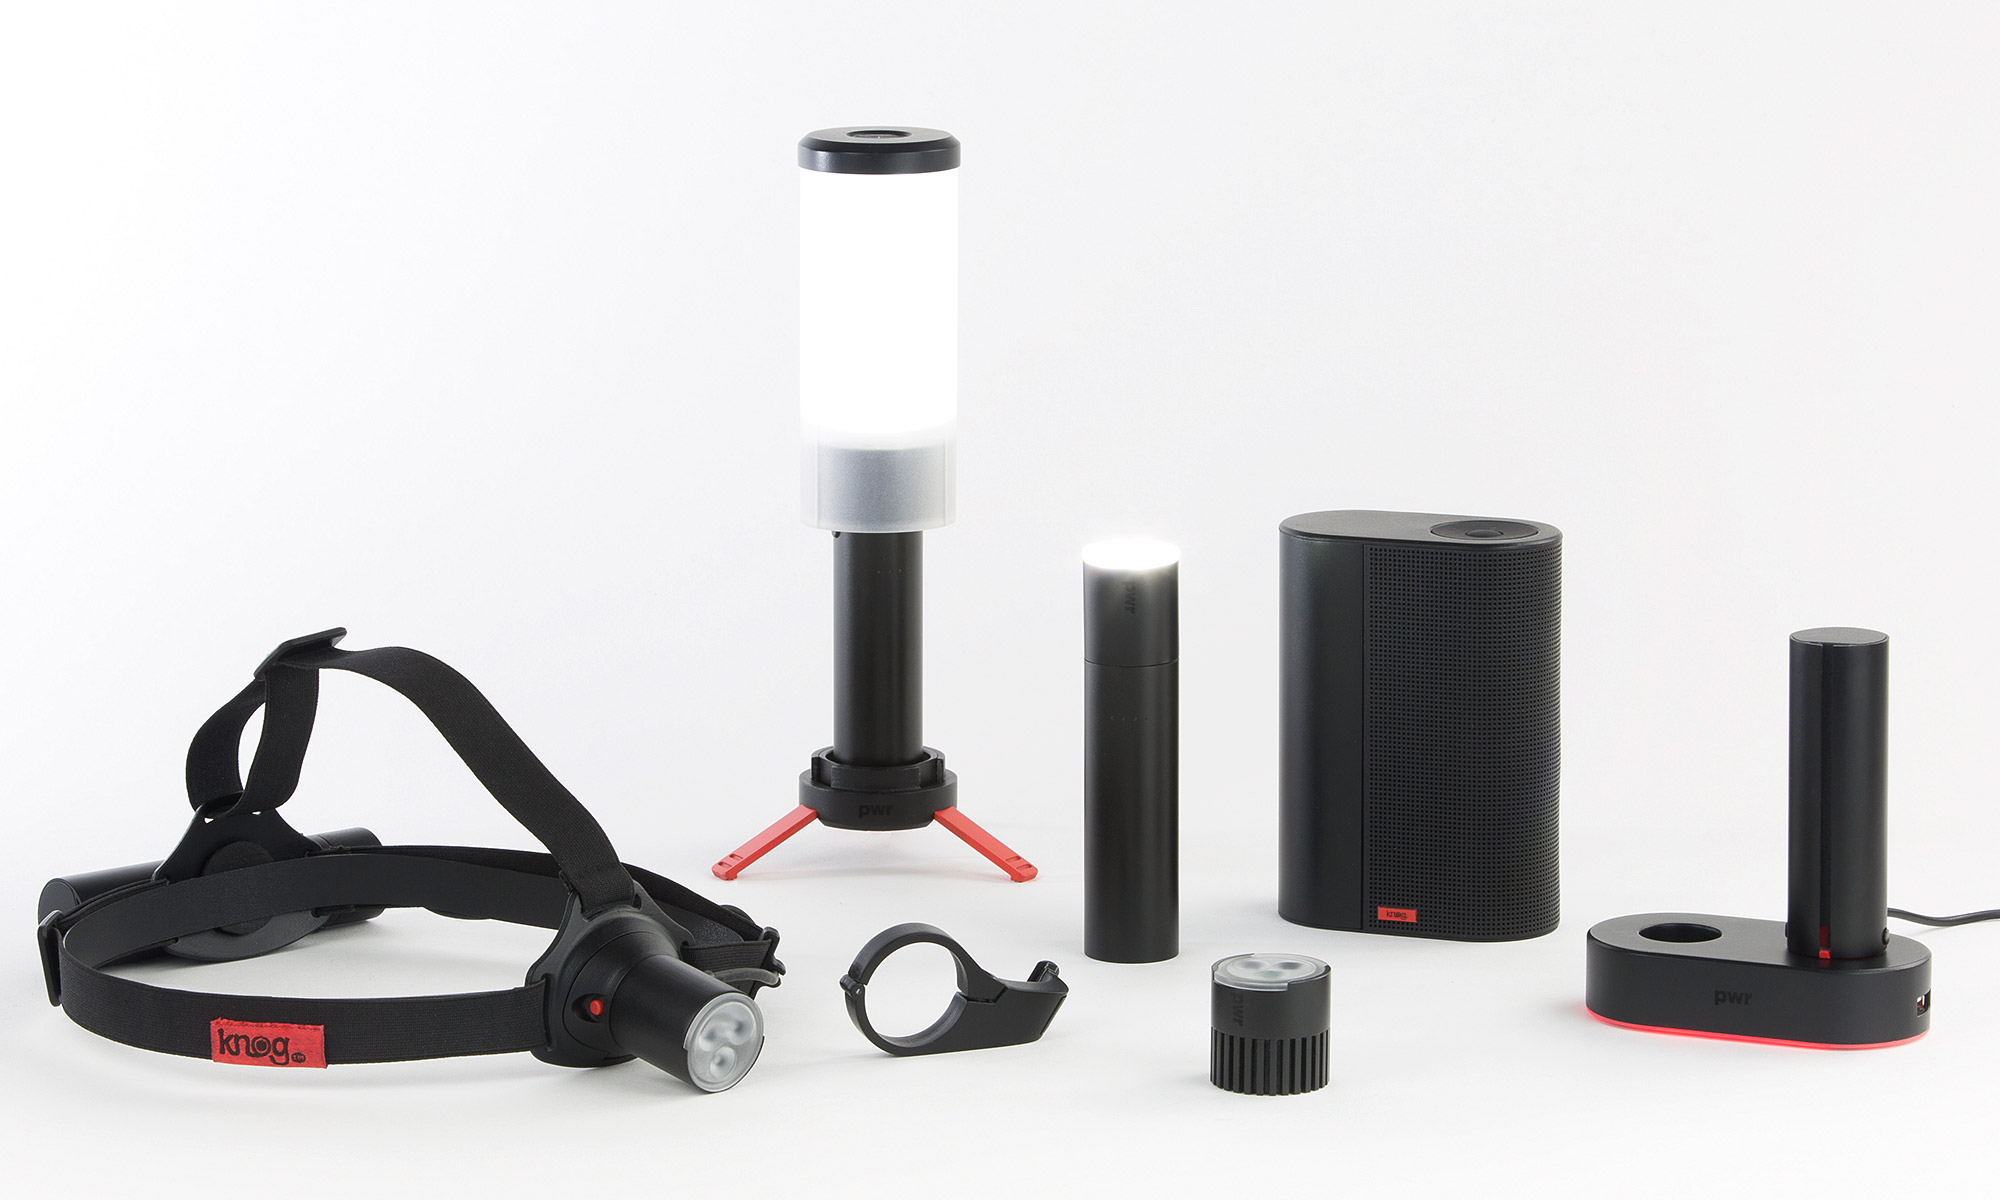 Knog takes to crowdfunding again for PWR light and powerpack system